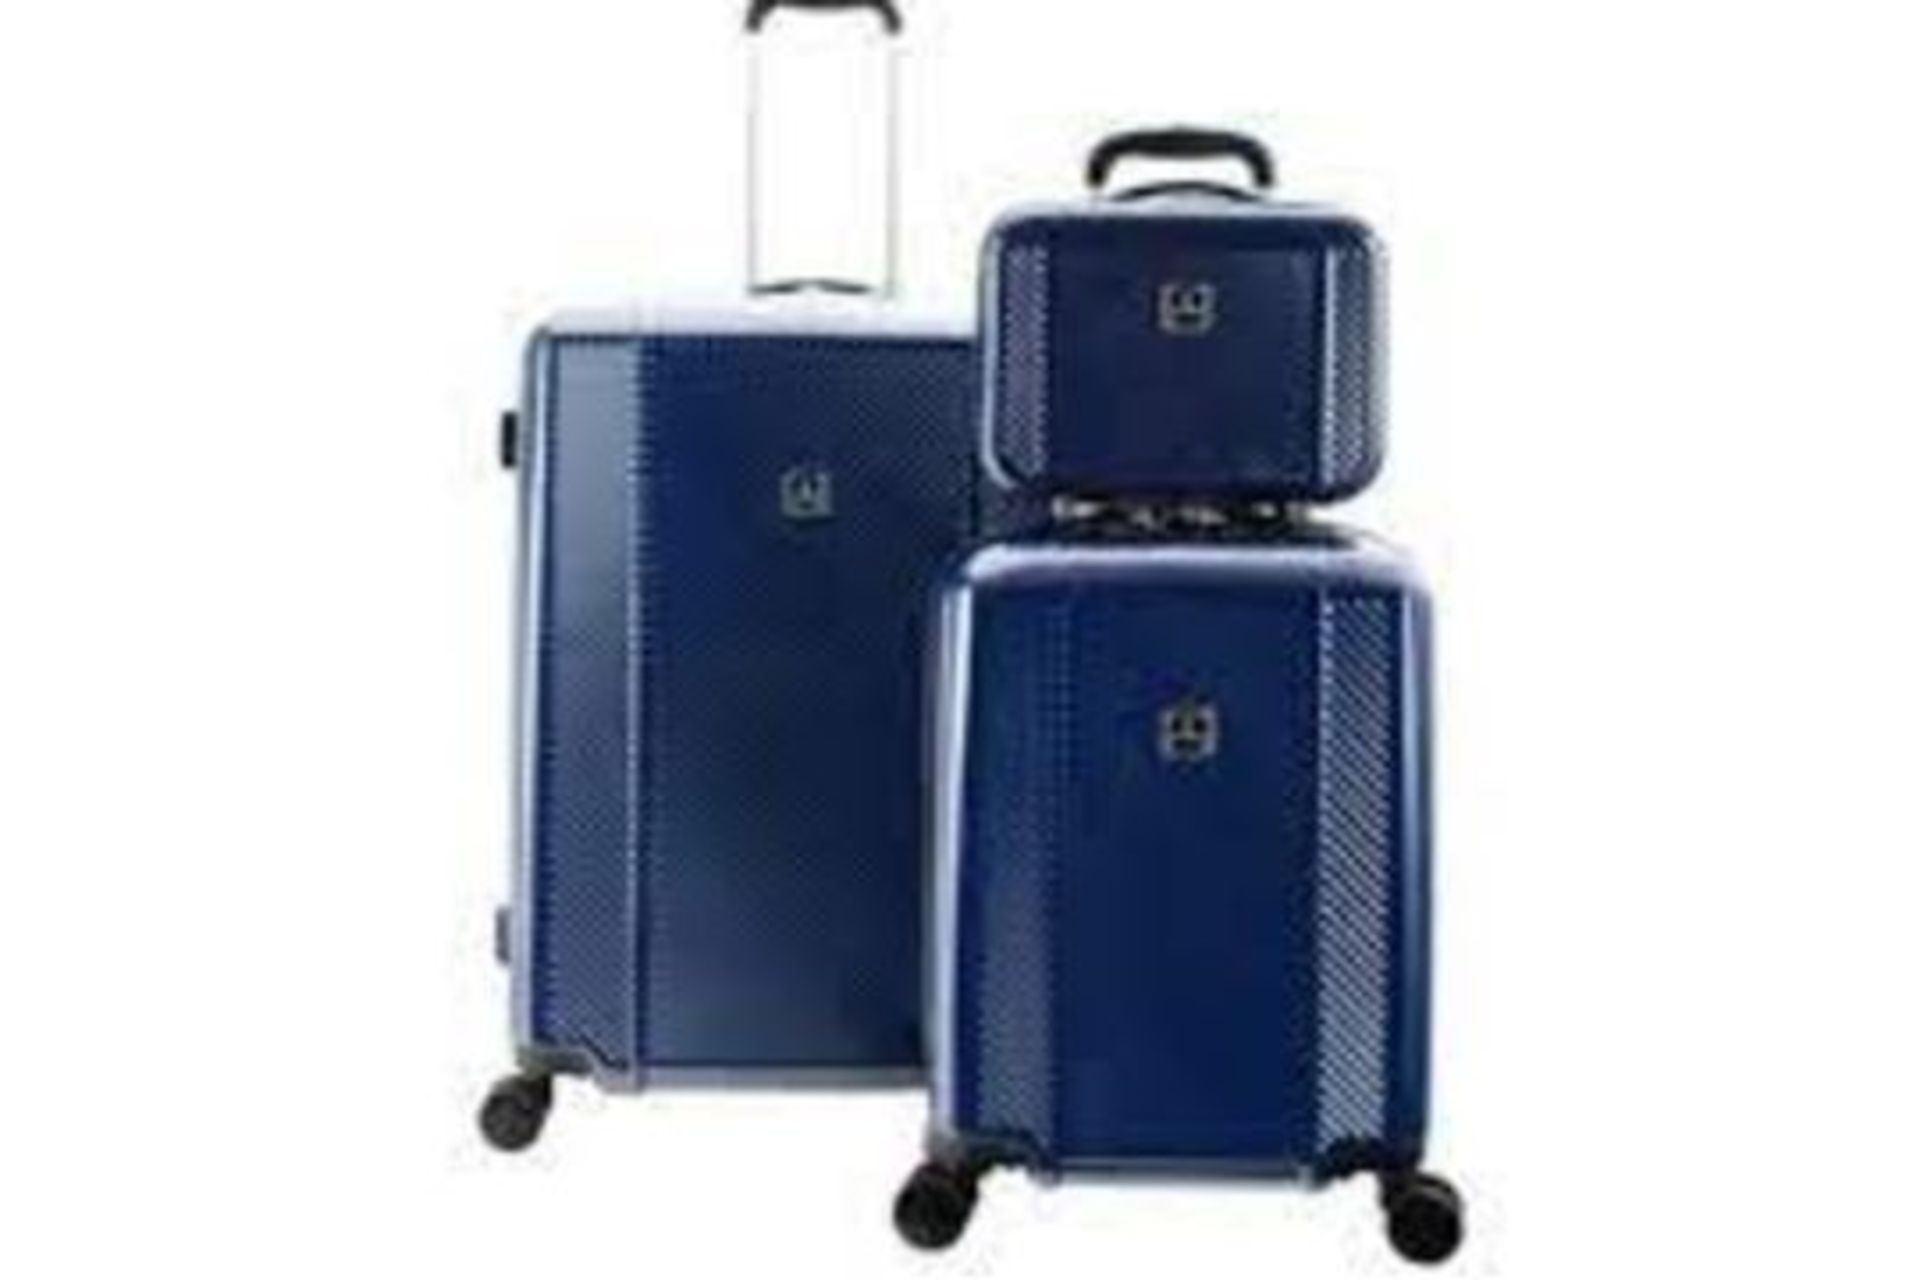 Pallet To Contain 16 x New Boxed 3 Piece Sets of TAG Spectrum Hardside Luggage Set. (BLUE). RRP £